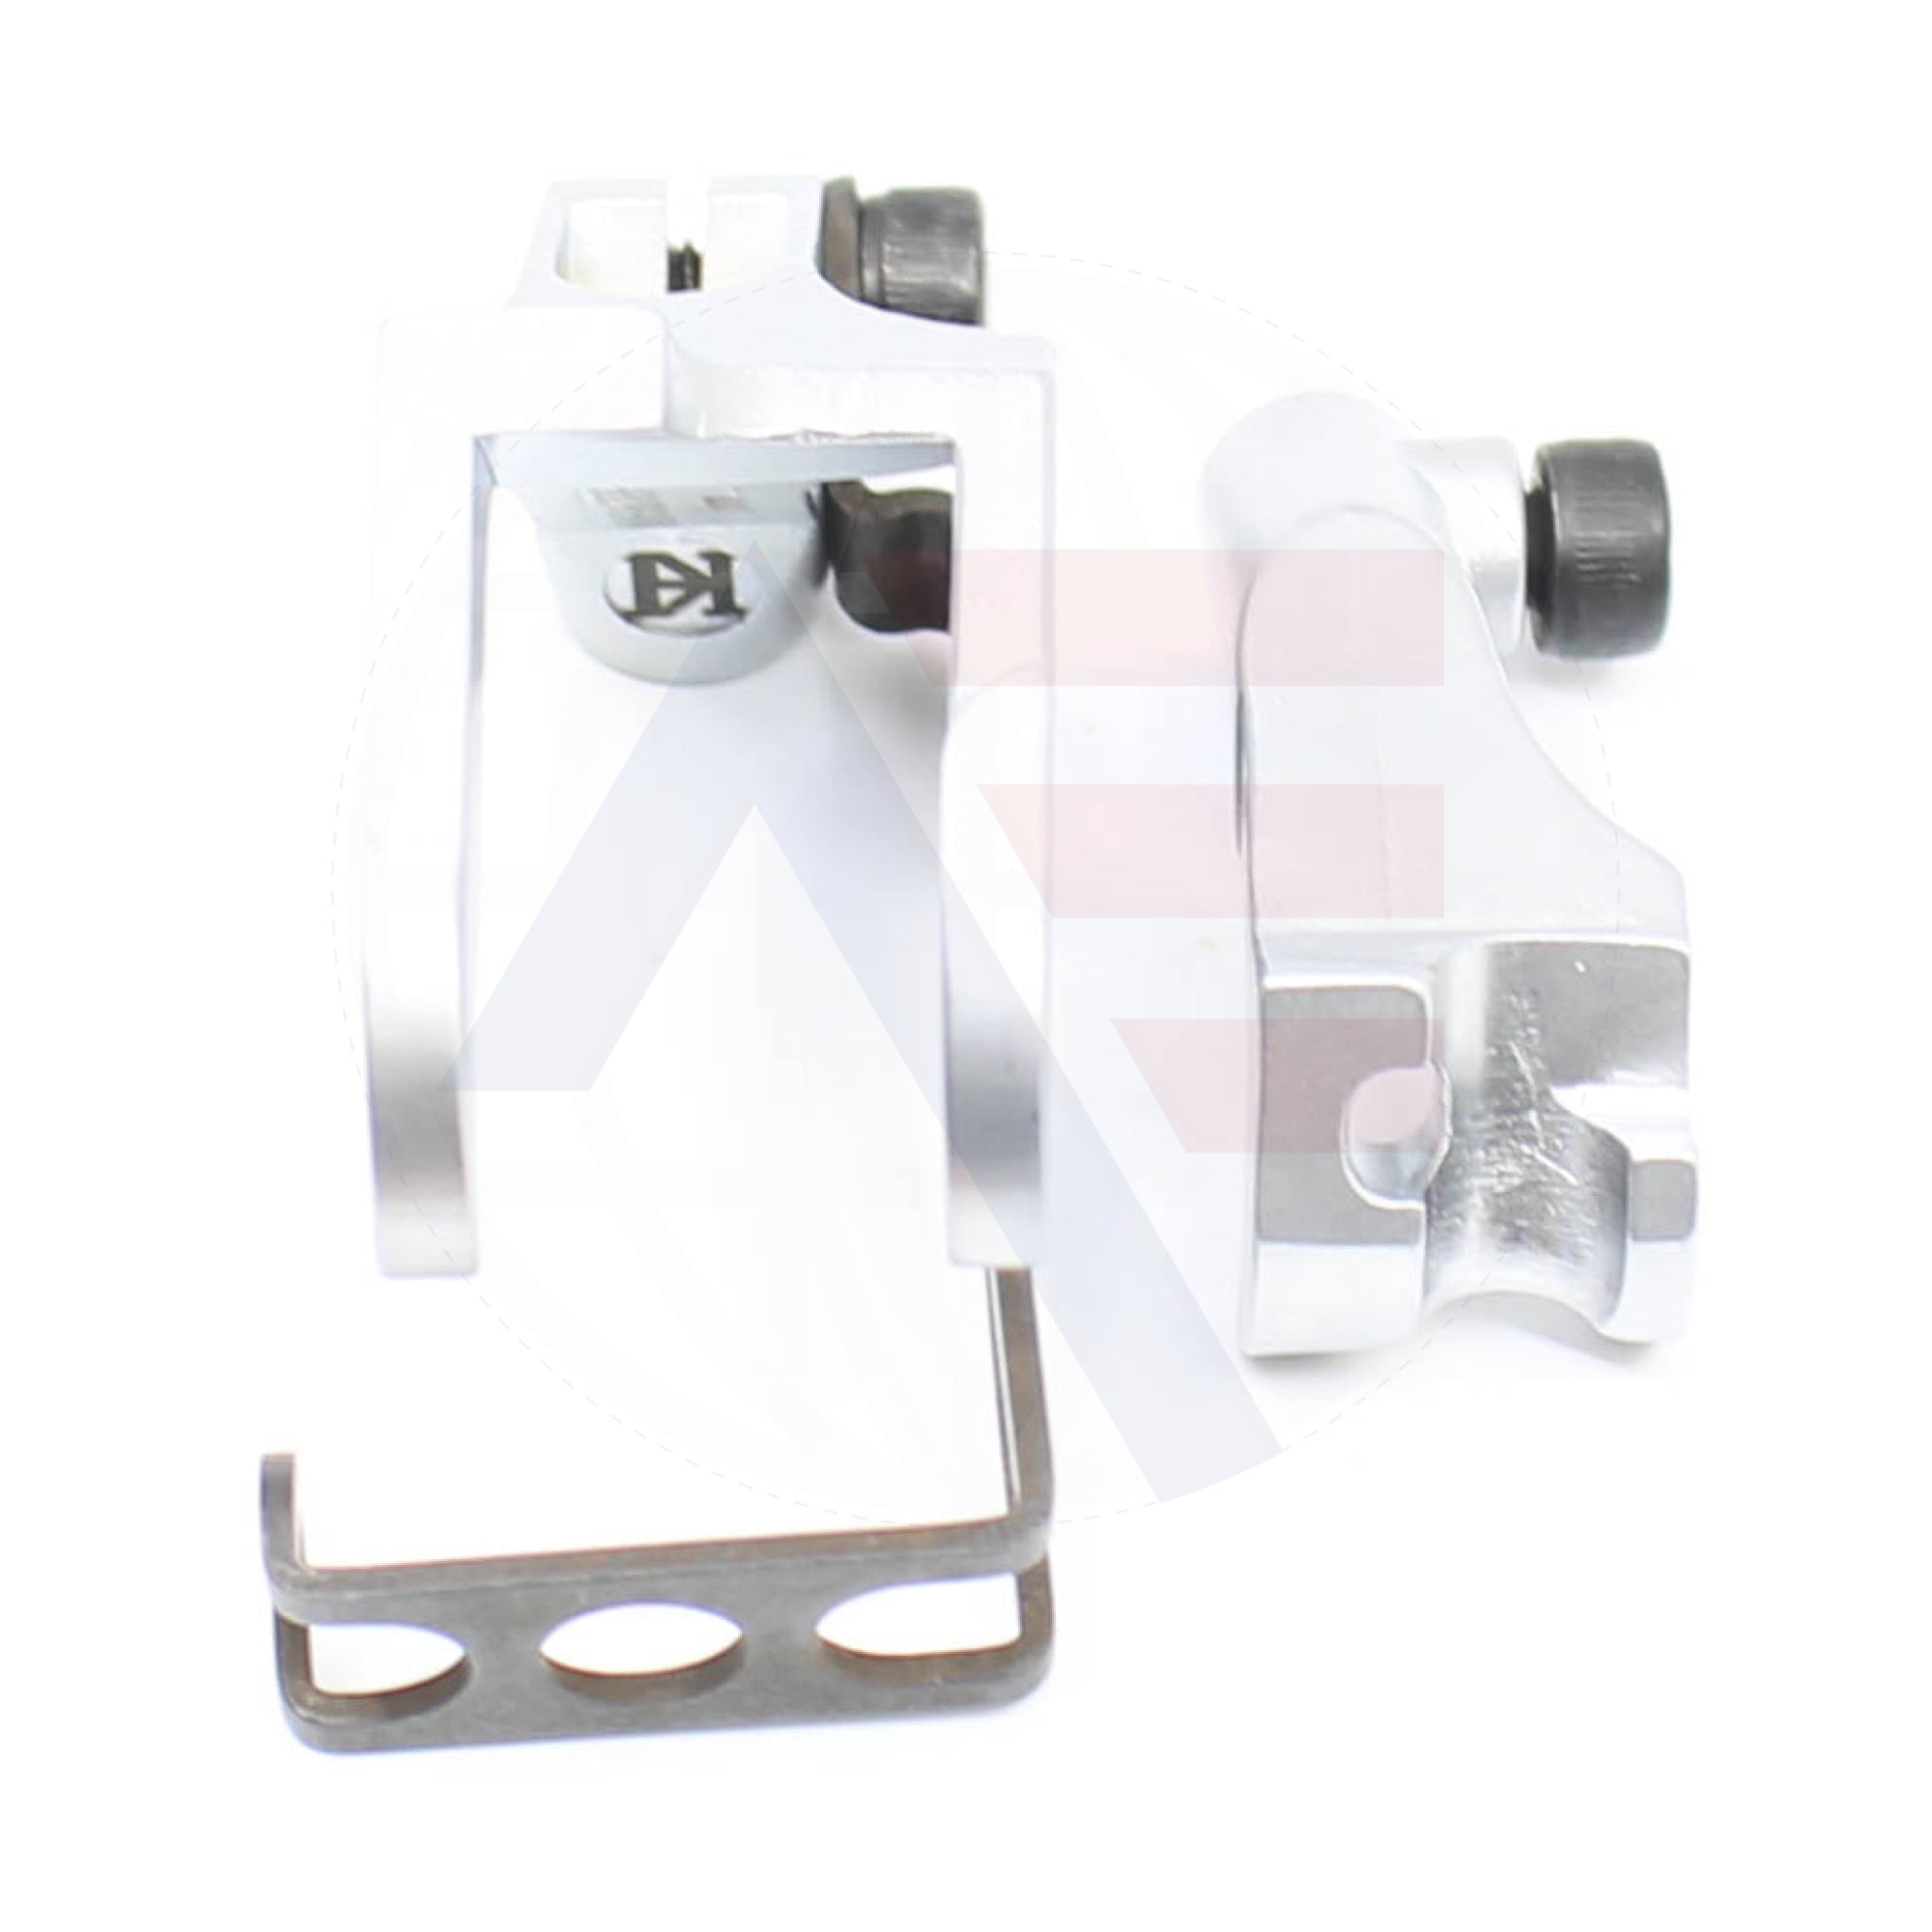 Kh367Pfx6 Piping Foot Set Sewing Machine Spare Parts